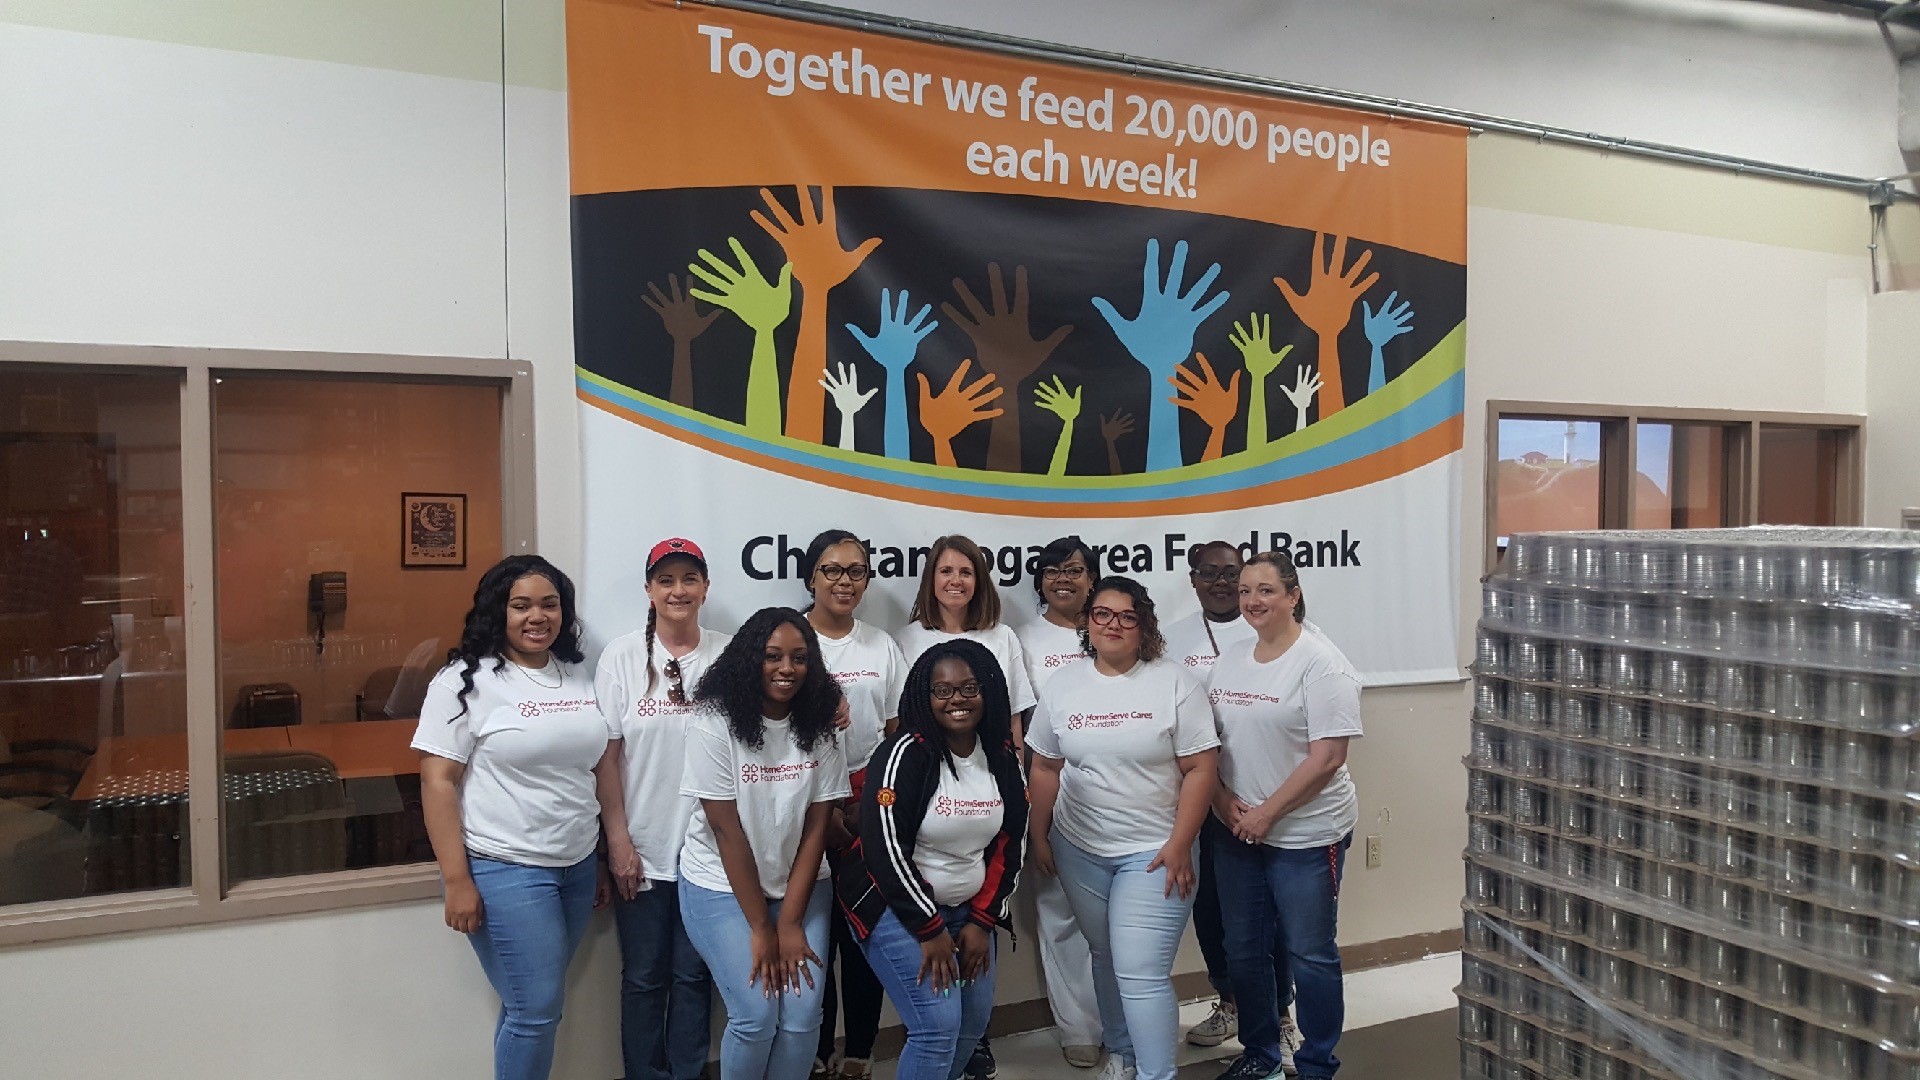 Employees at the Chattanooga Area Food Bank